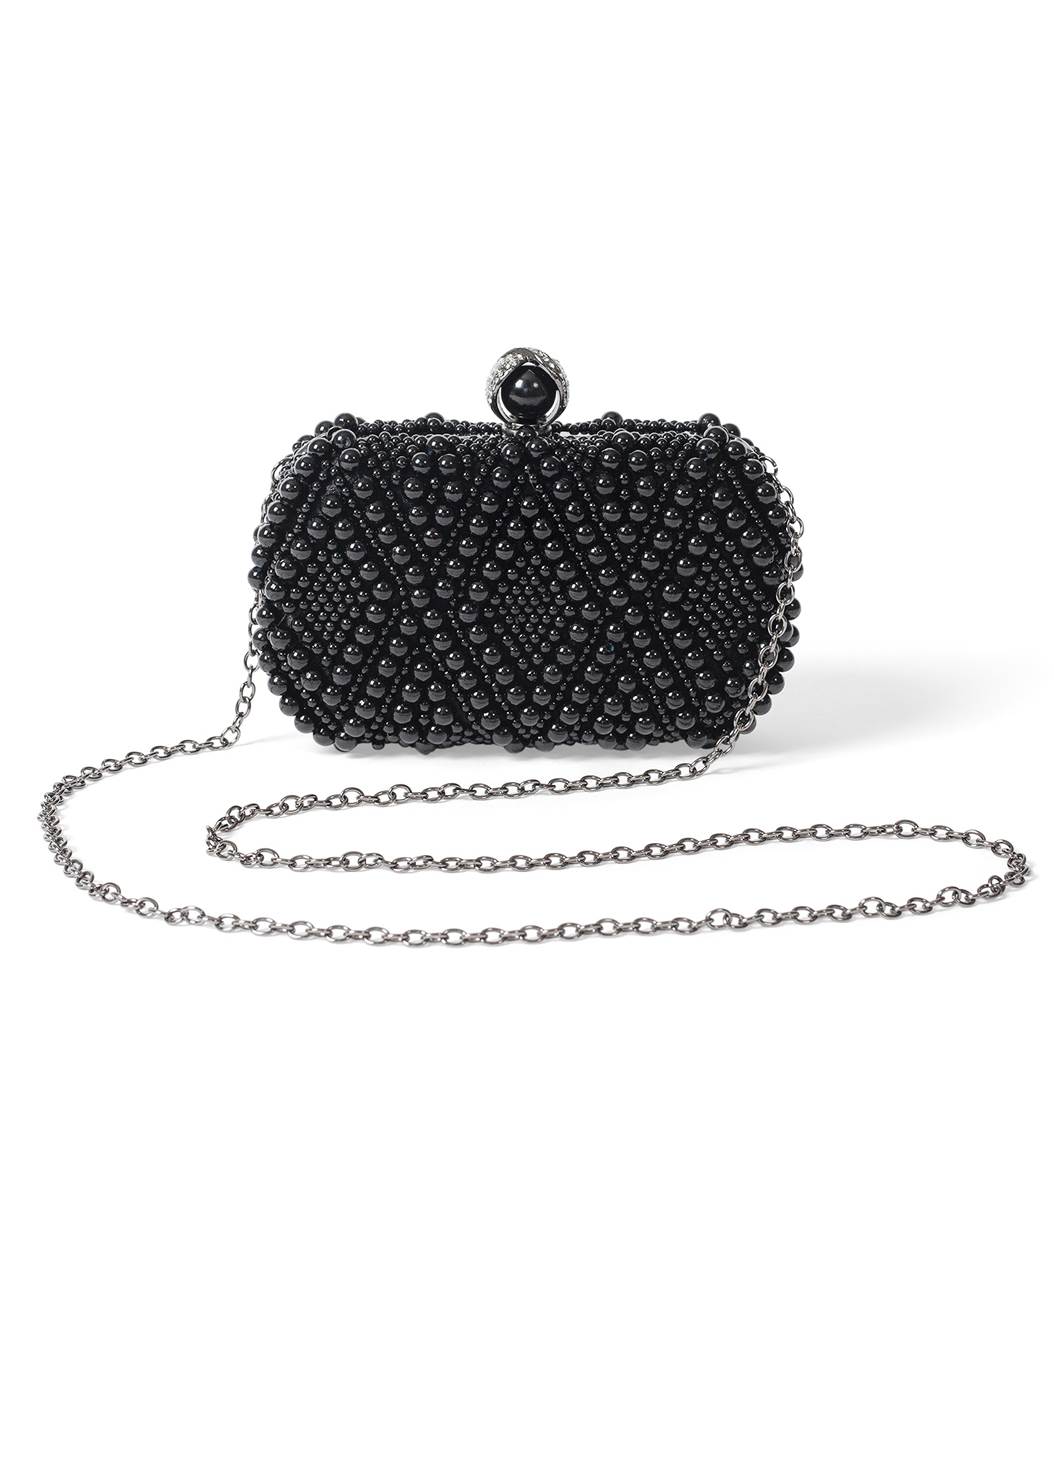 Women's Beaded Clutch and Crossbody Accessories (Generic) - Black Multi, Size O/S by Venus